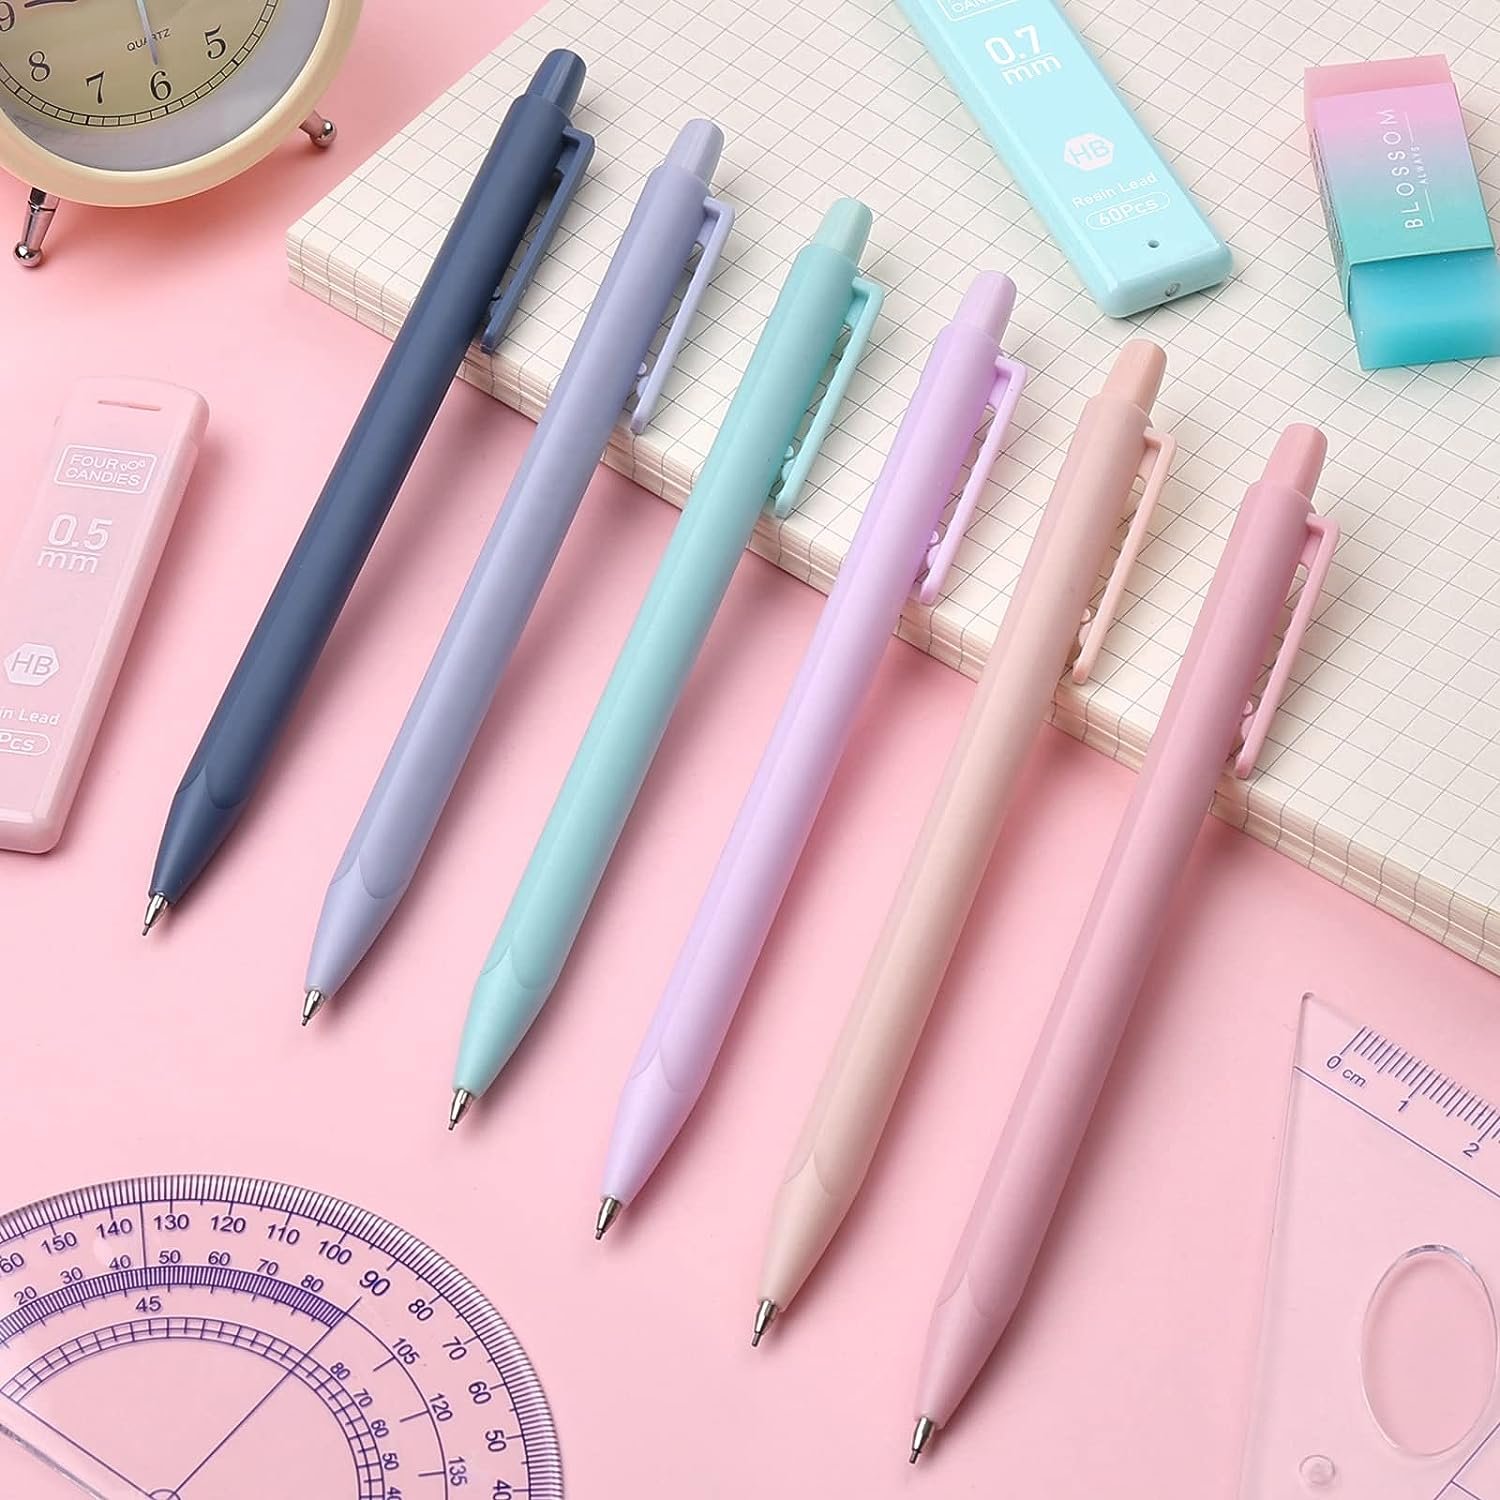 Aesthetic Stationery Brands You Might Not Know